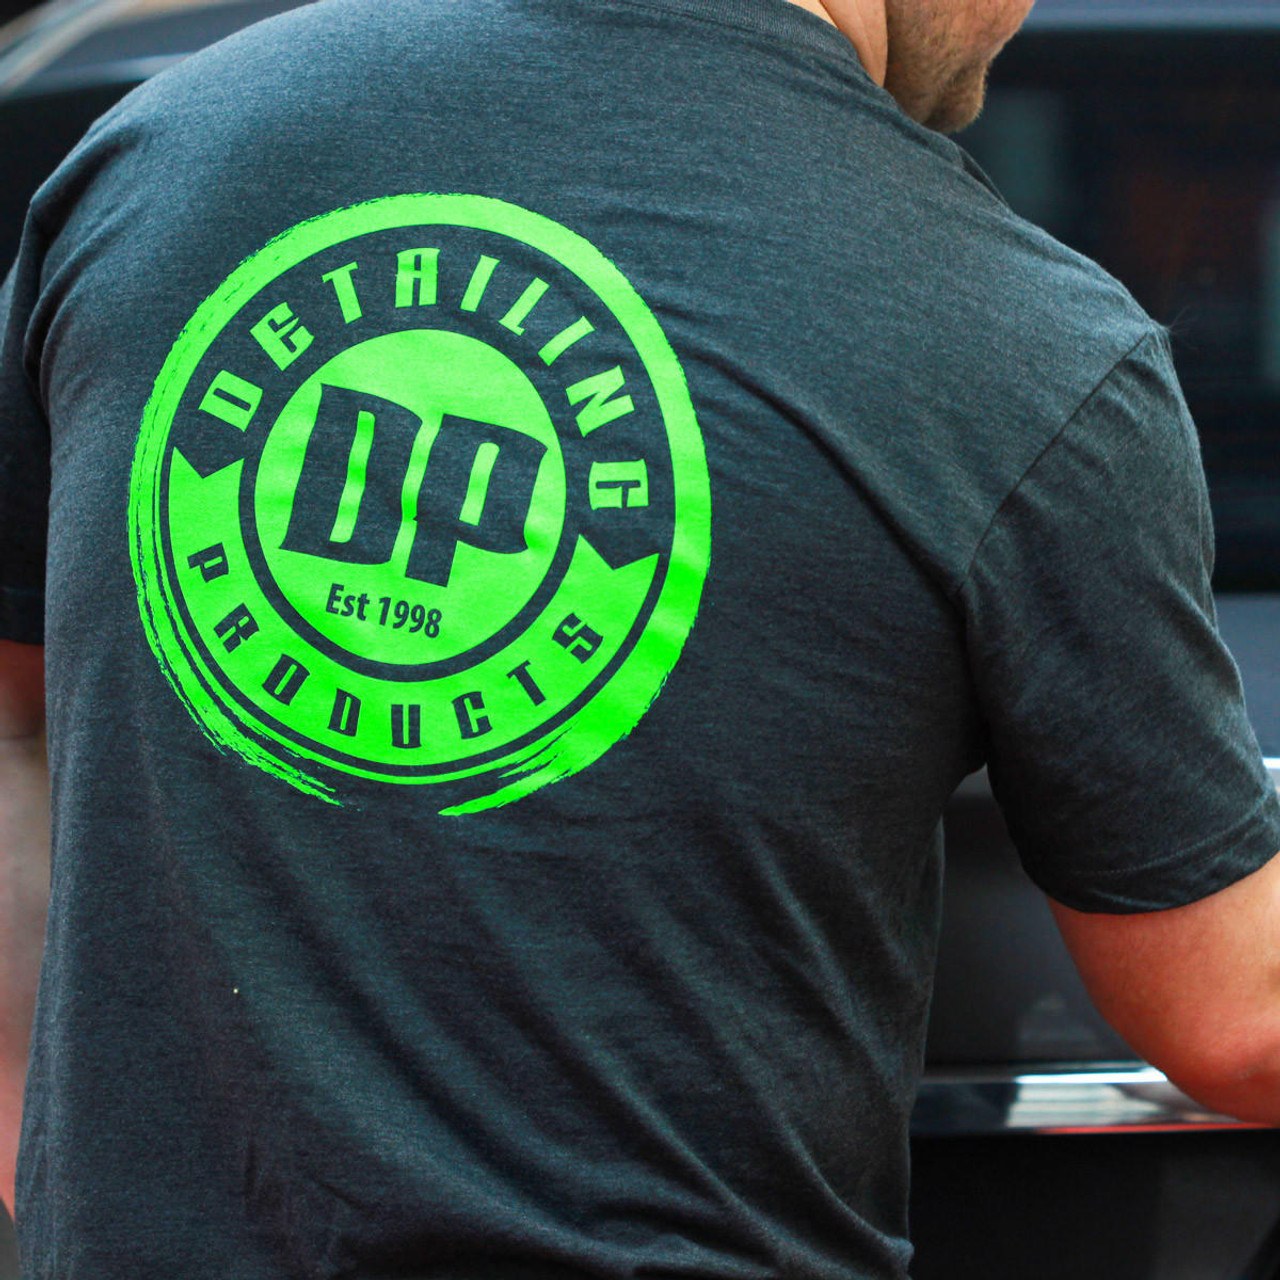 DP Detailing Products DP Brand T-Shirt - FREE With Purchase of 3 or More DP Products